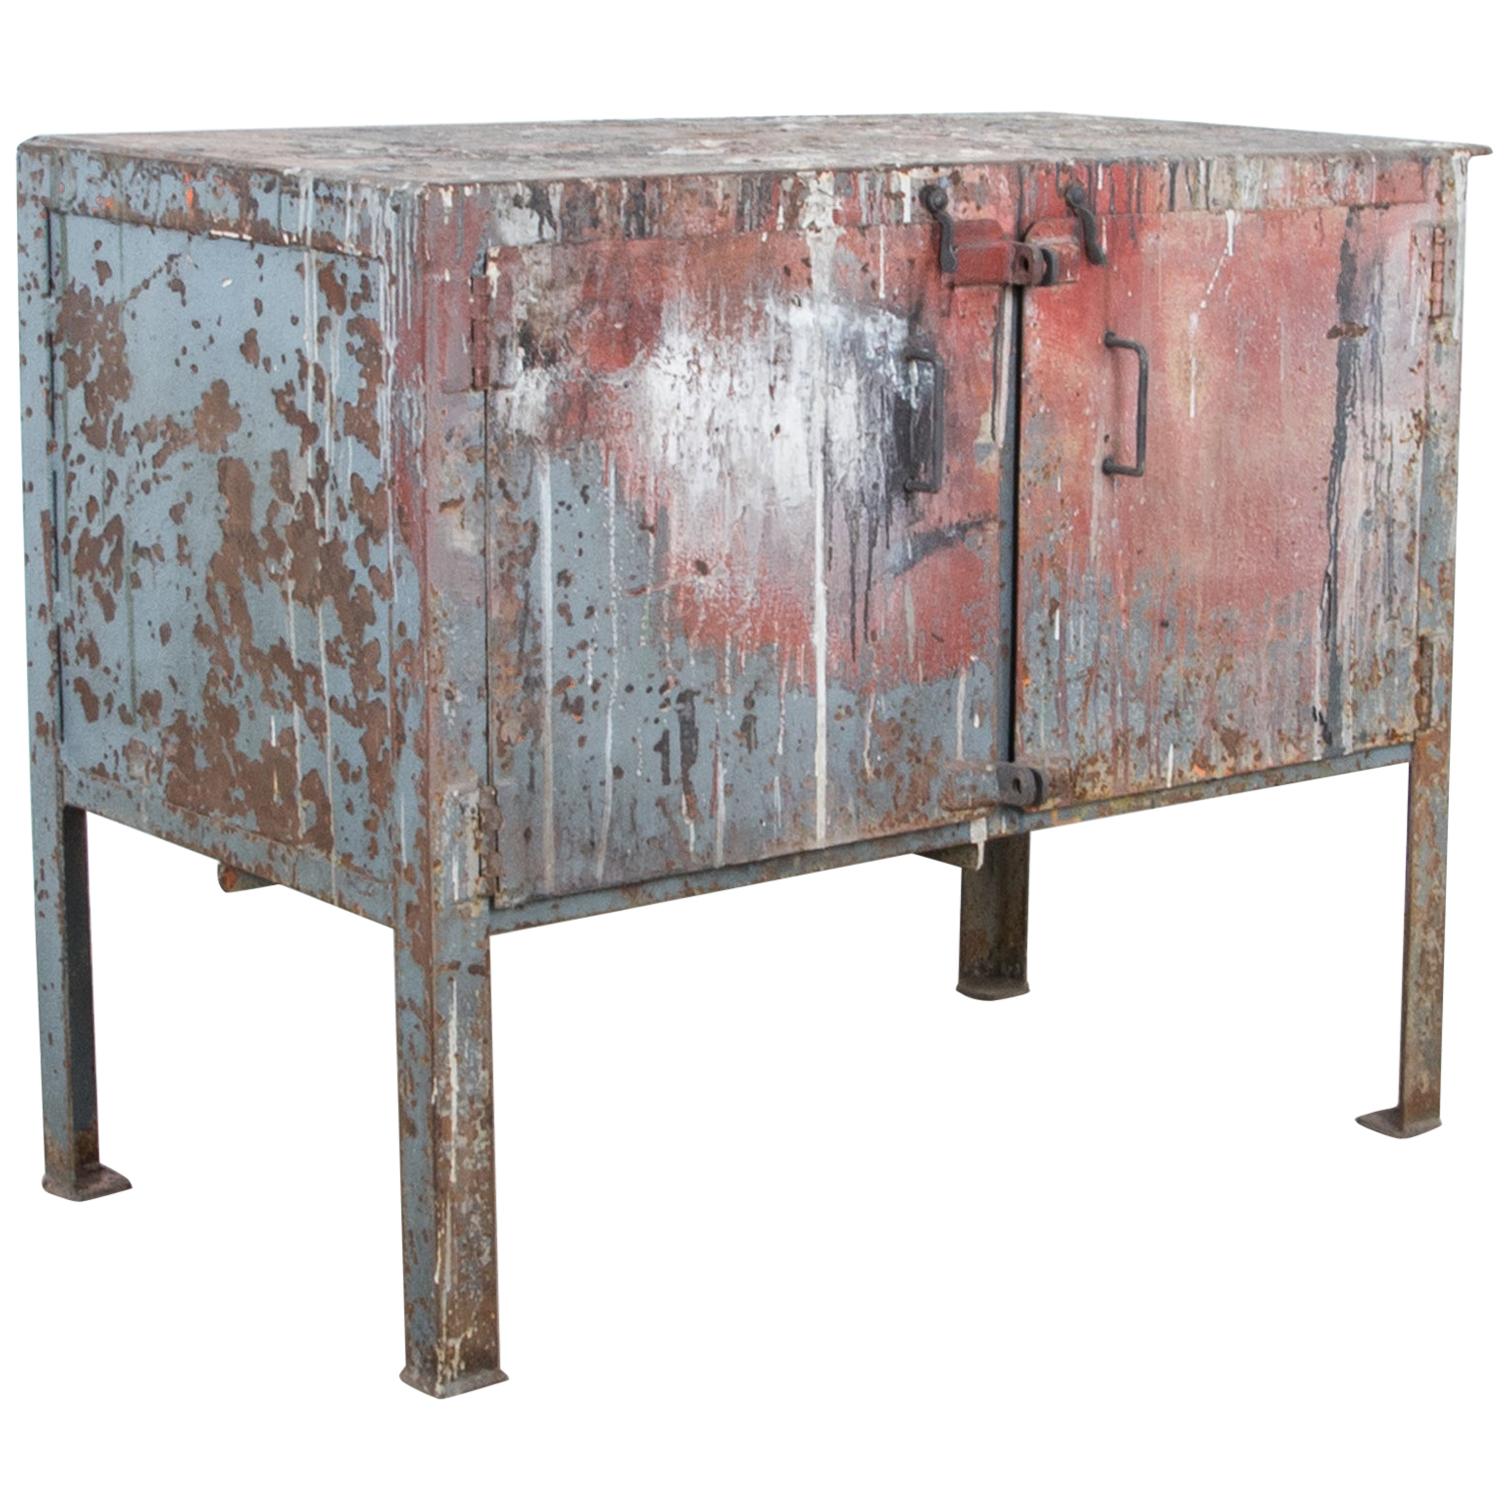 Early 20th Century French Industrial Storage Cabinet